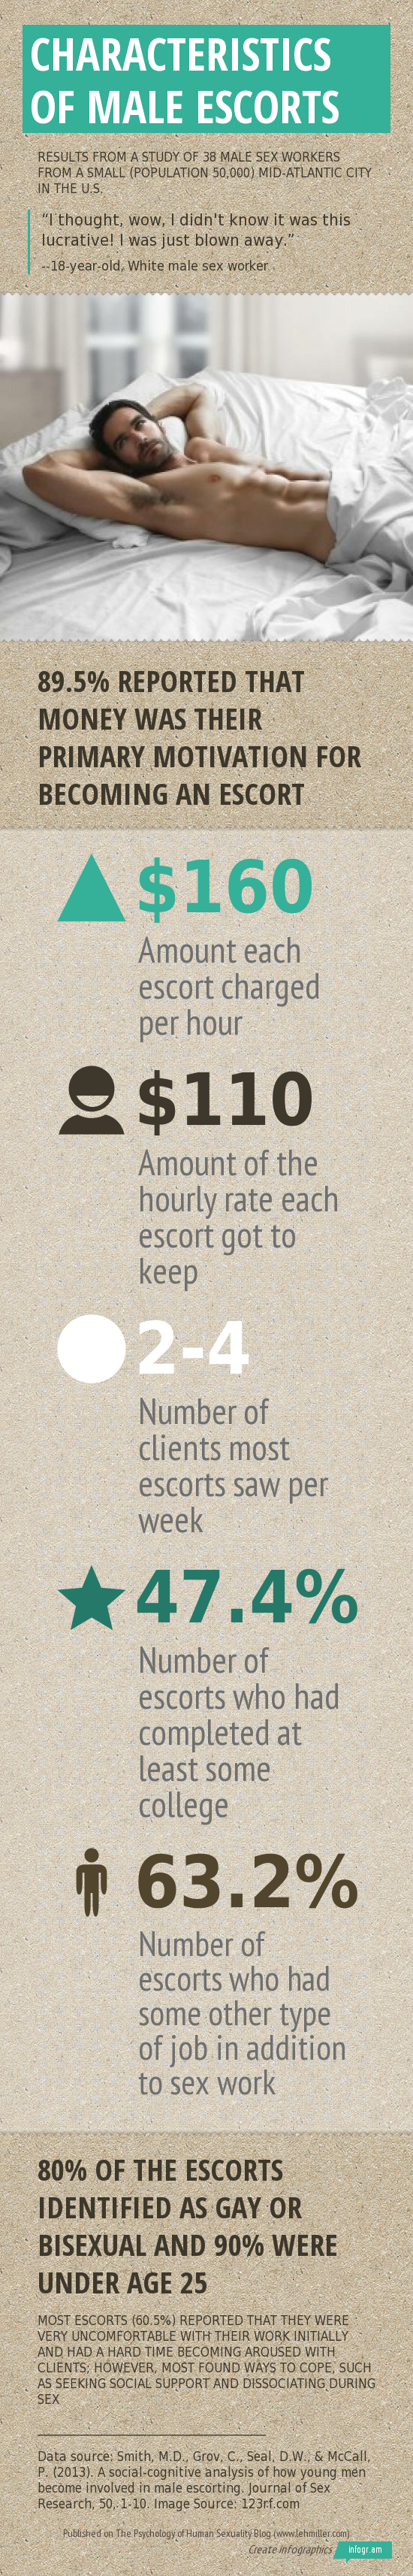 Infographic explaining how much money male escorts get paid and their typical characteristics